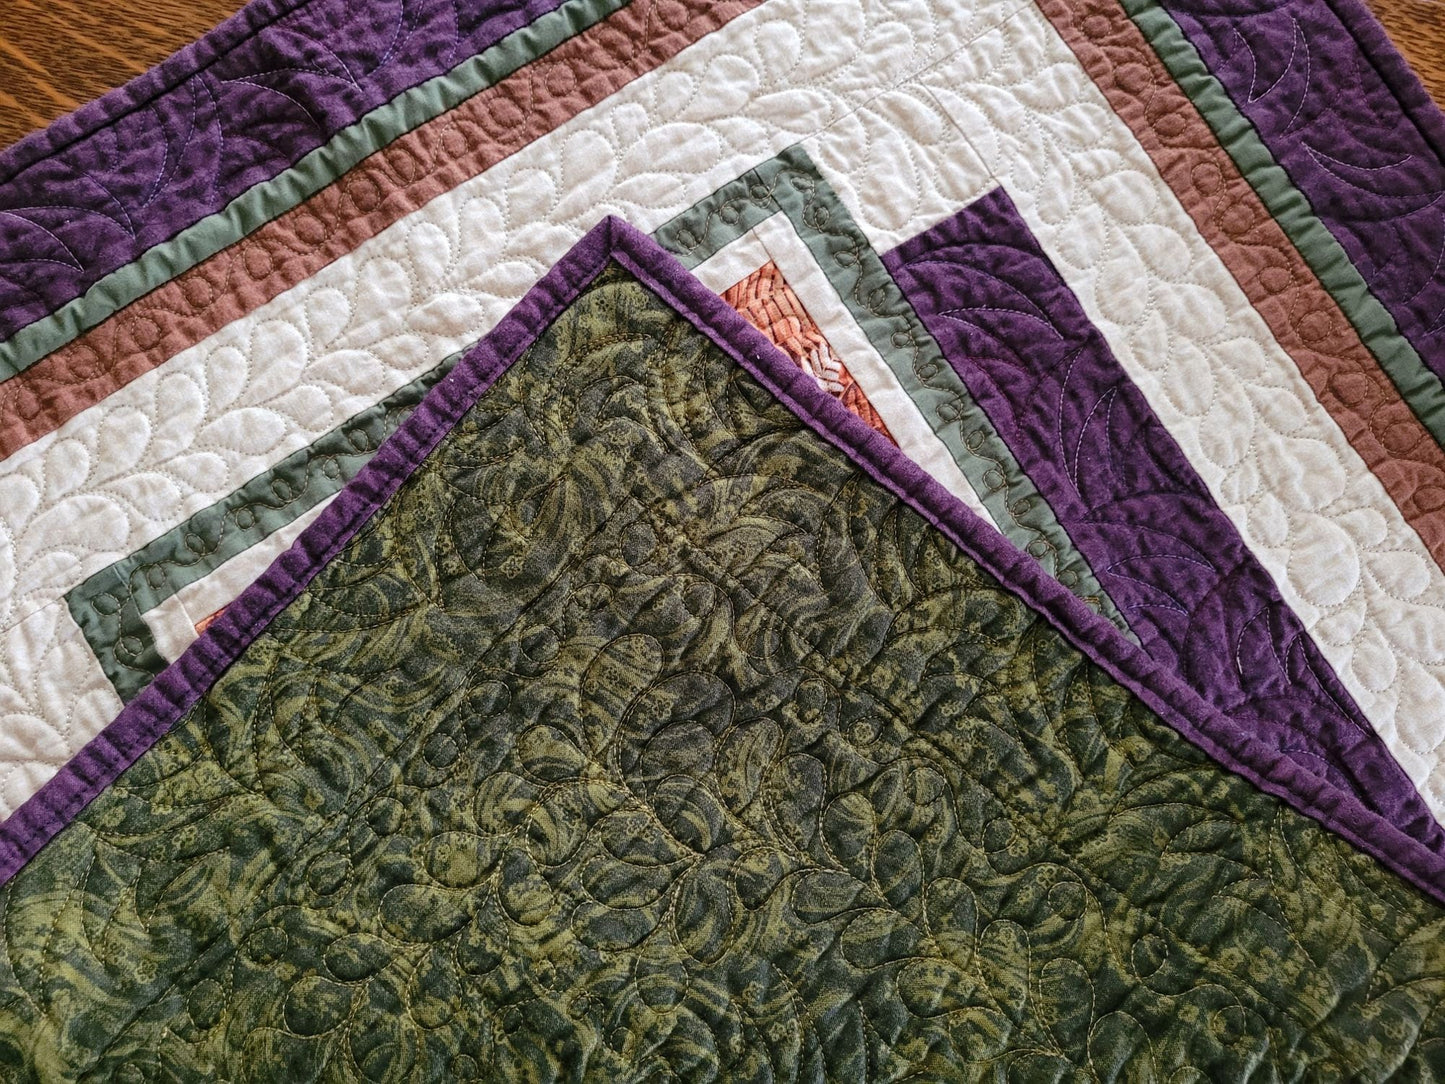 showing backing of quilt